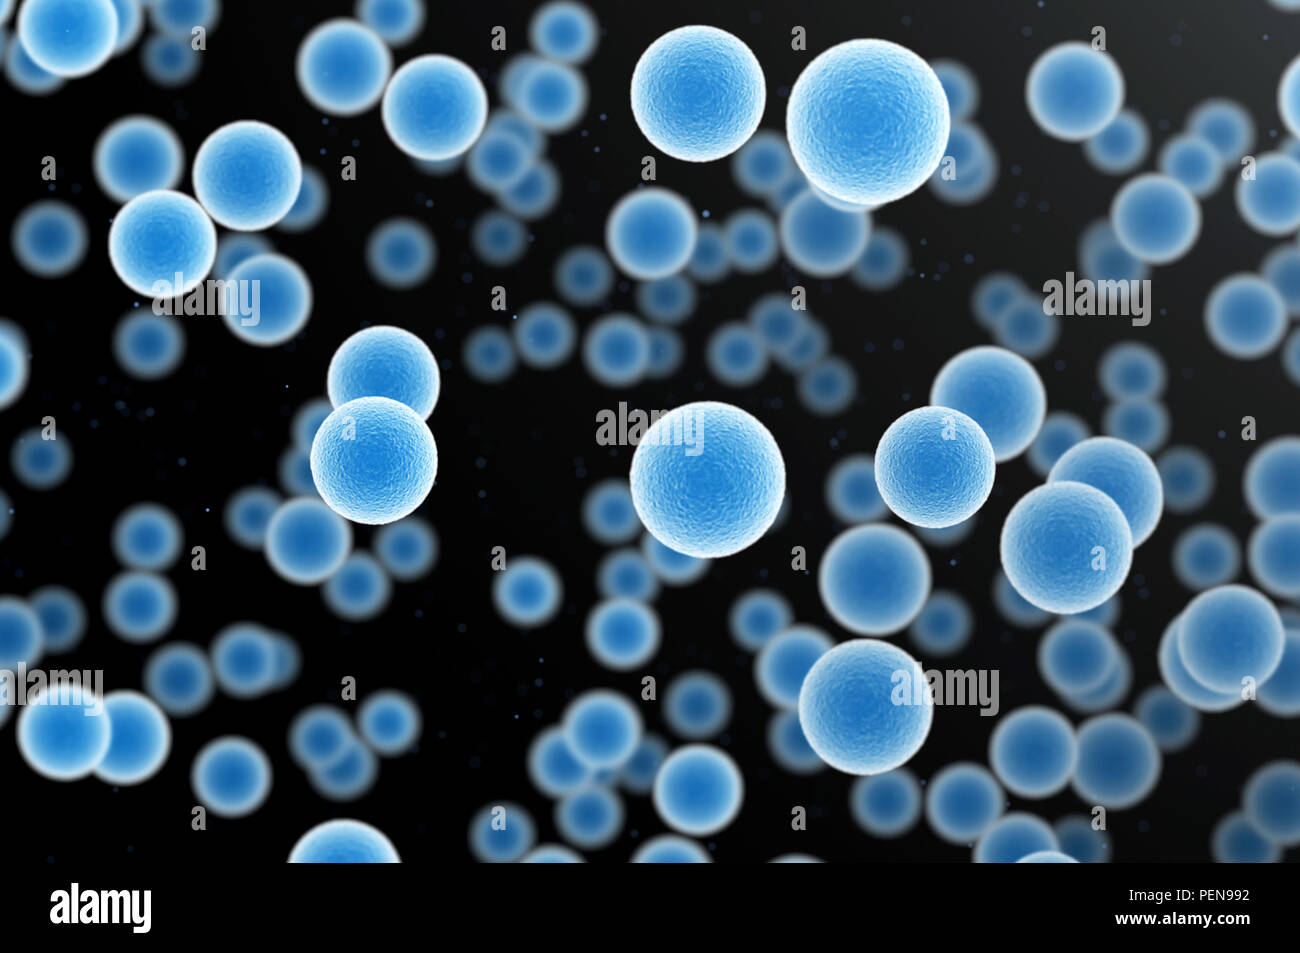 Biology background blue cells under microscope. Biology science and medicine background Stock Photo